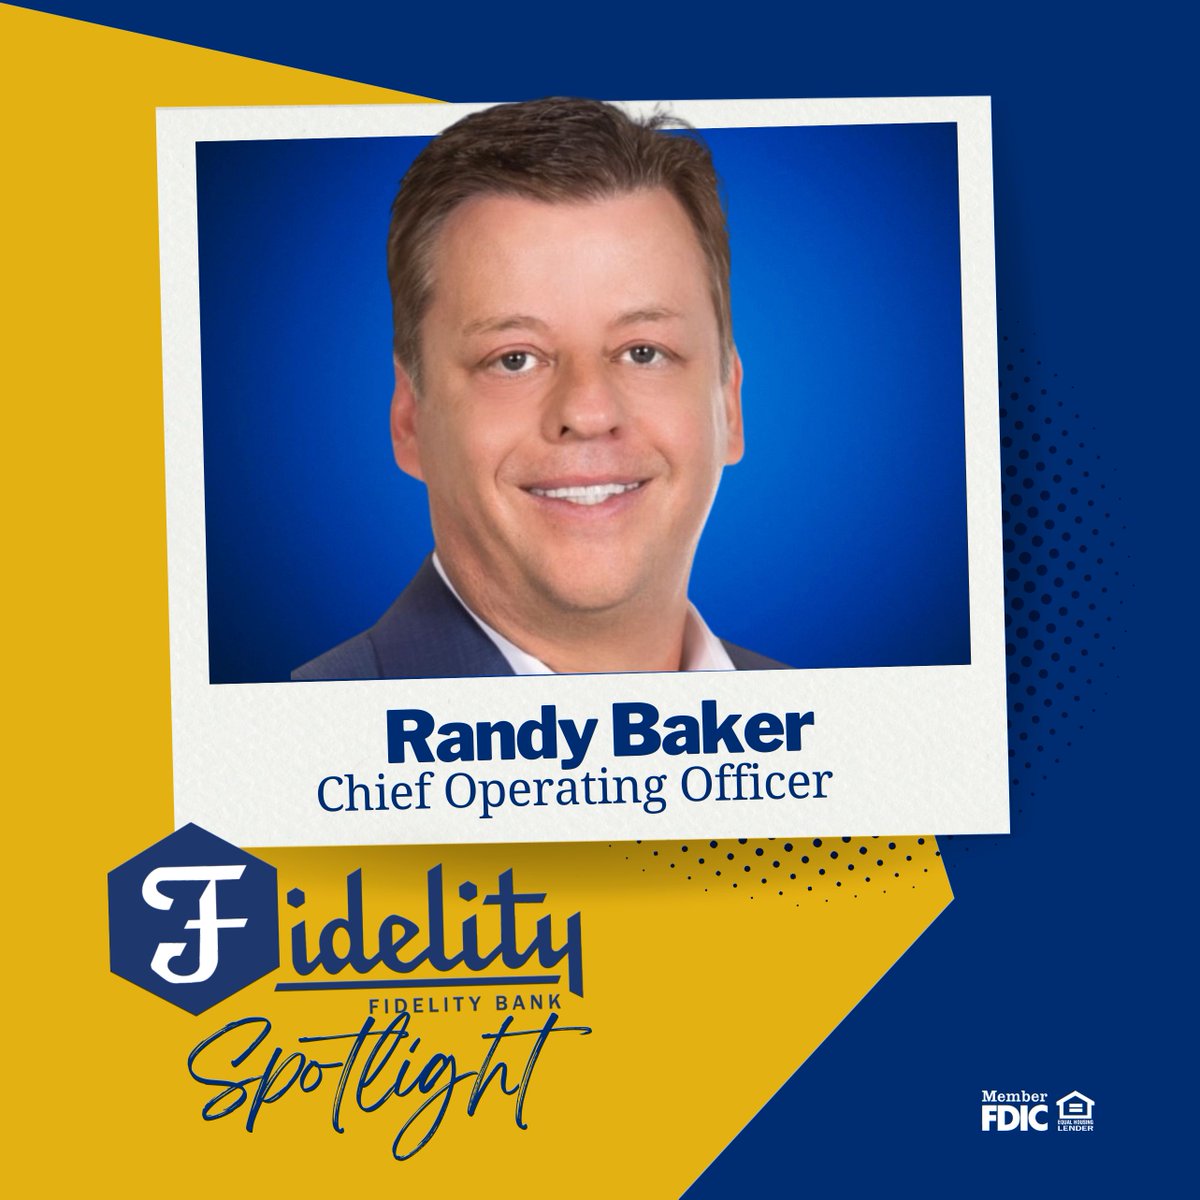 Meet Randy, Fidelity Bank's Chief Operating Officer and today's #FidelityFam Spotlight! 
Overseeing Operations, IT, and Project Management is a big undertaking, but Randy loves being part of the strategic future of the bank and being #HereForGood.